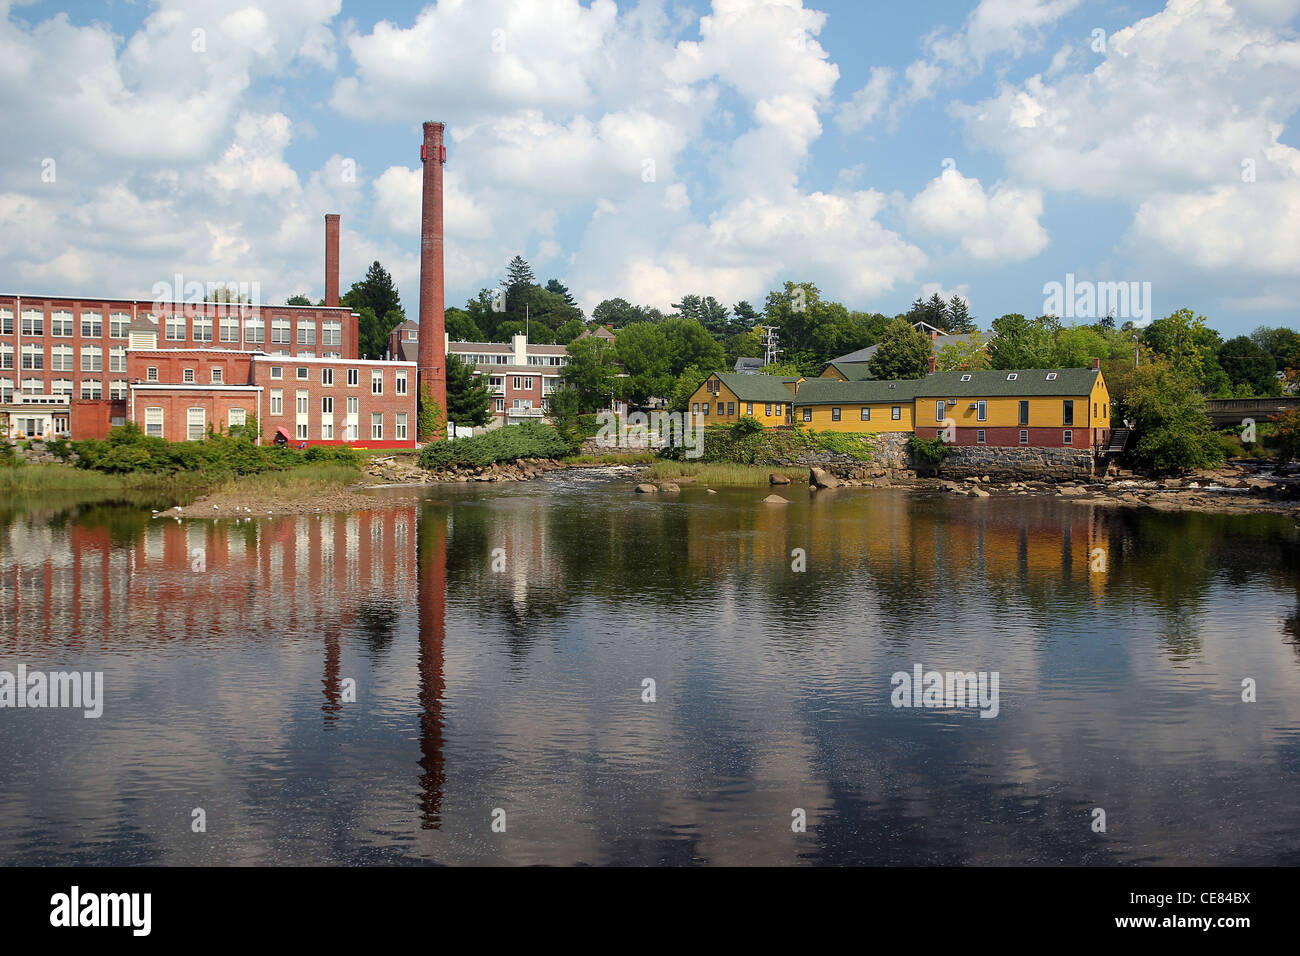 Old factory buildings reflected in the river in Exeter, New Hampshire Stock Photo